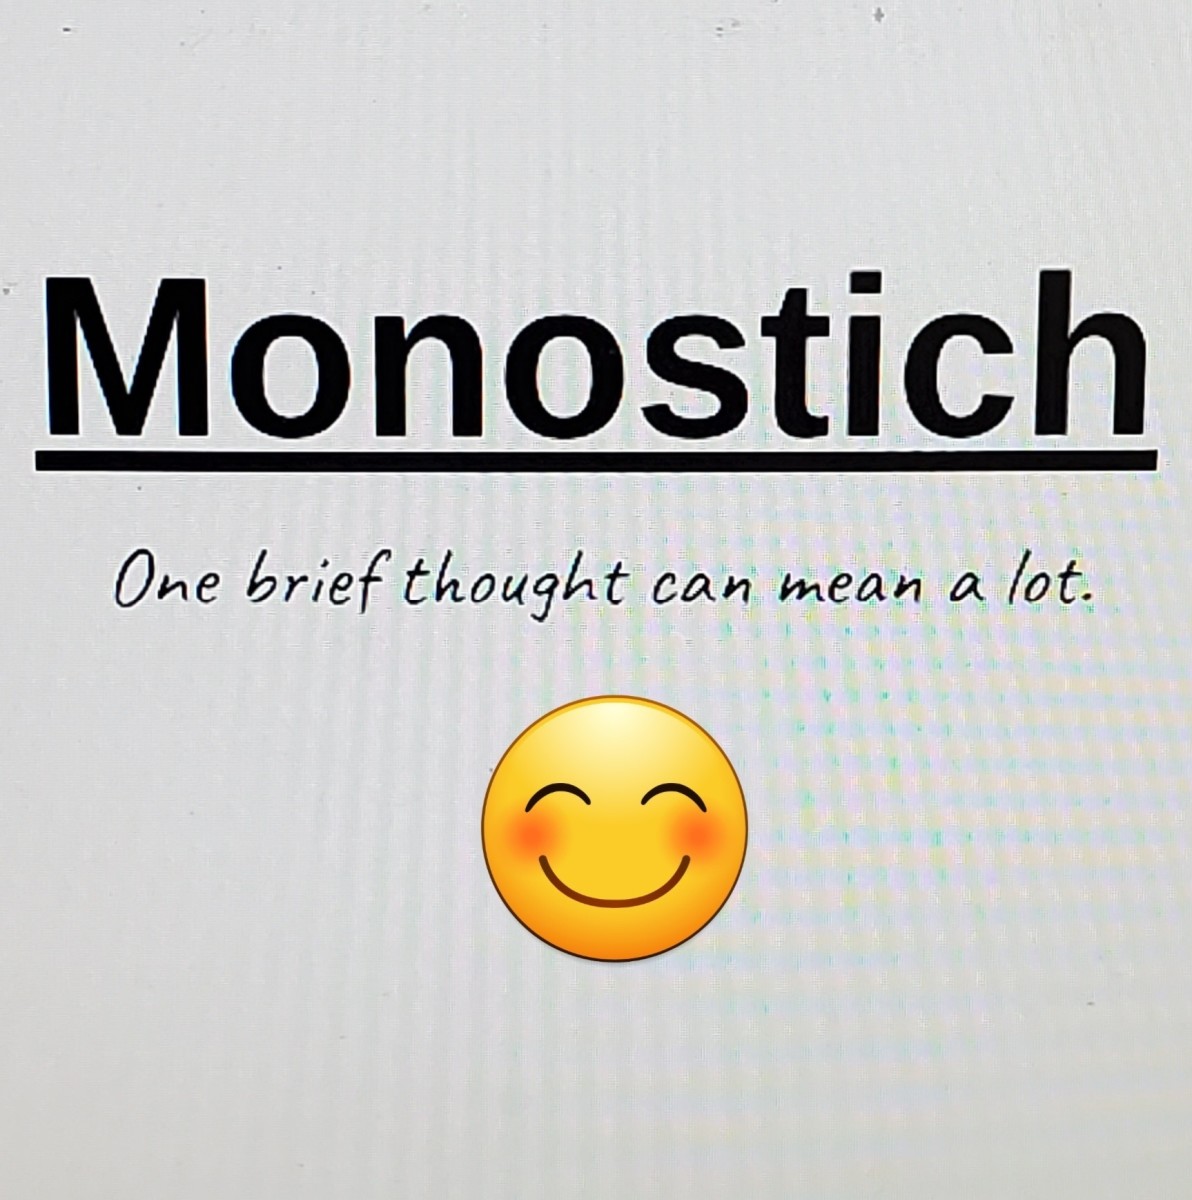 Monostich: When One Poetic Line Says it All